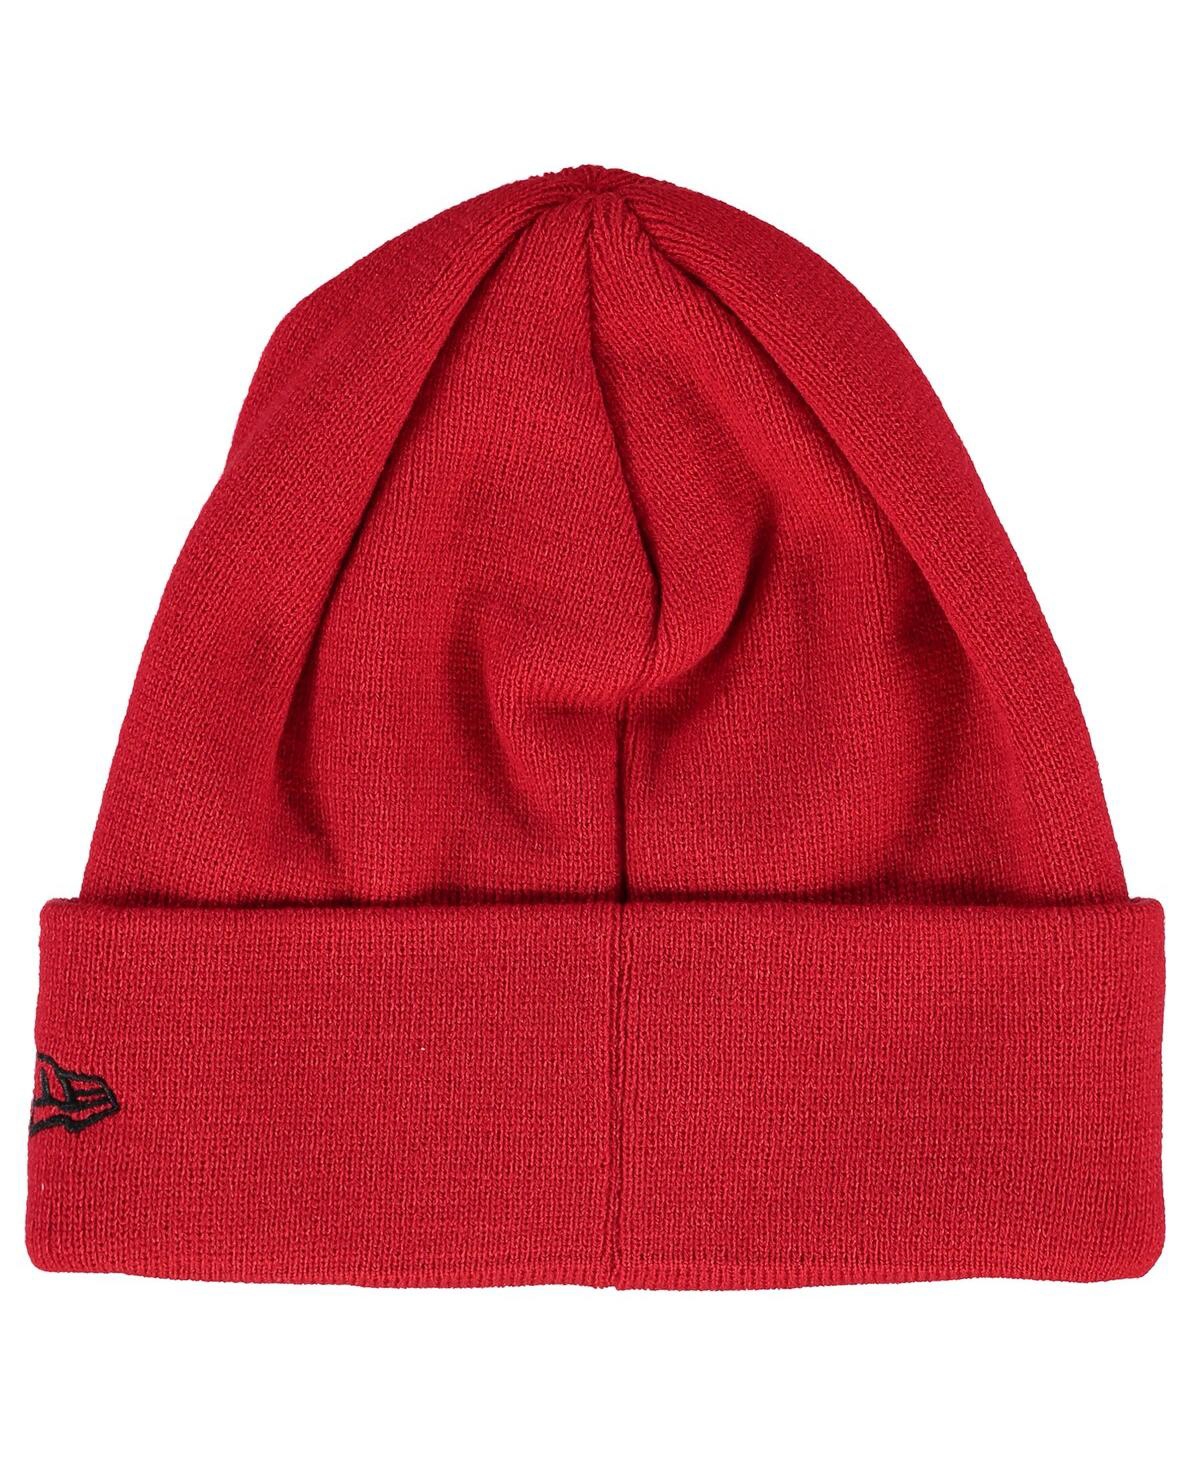 Shop New Era Men's And Women's  Red Manchester United Basic Cuffed Knit Hat